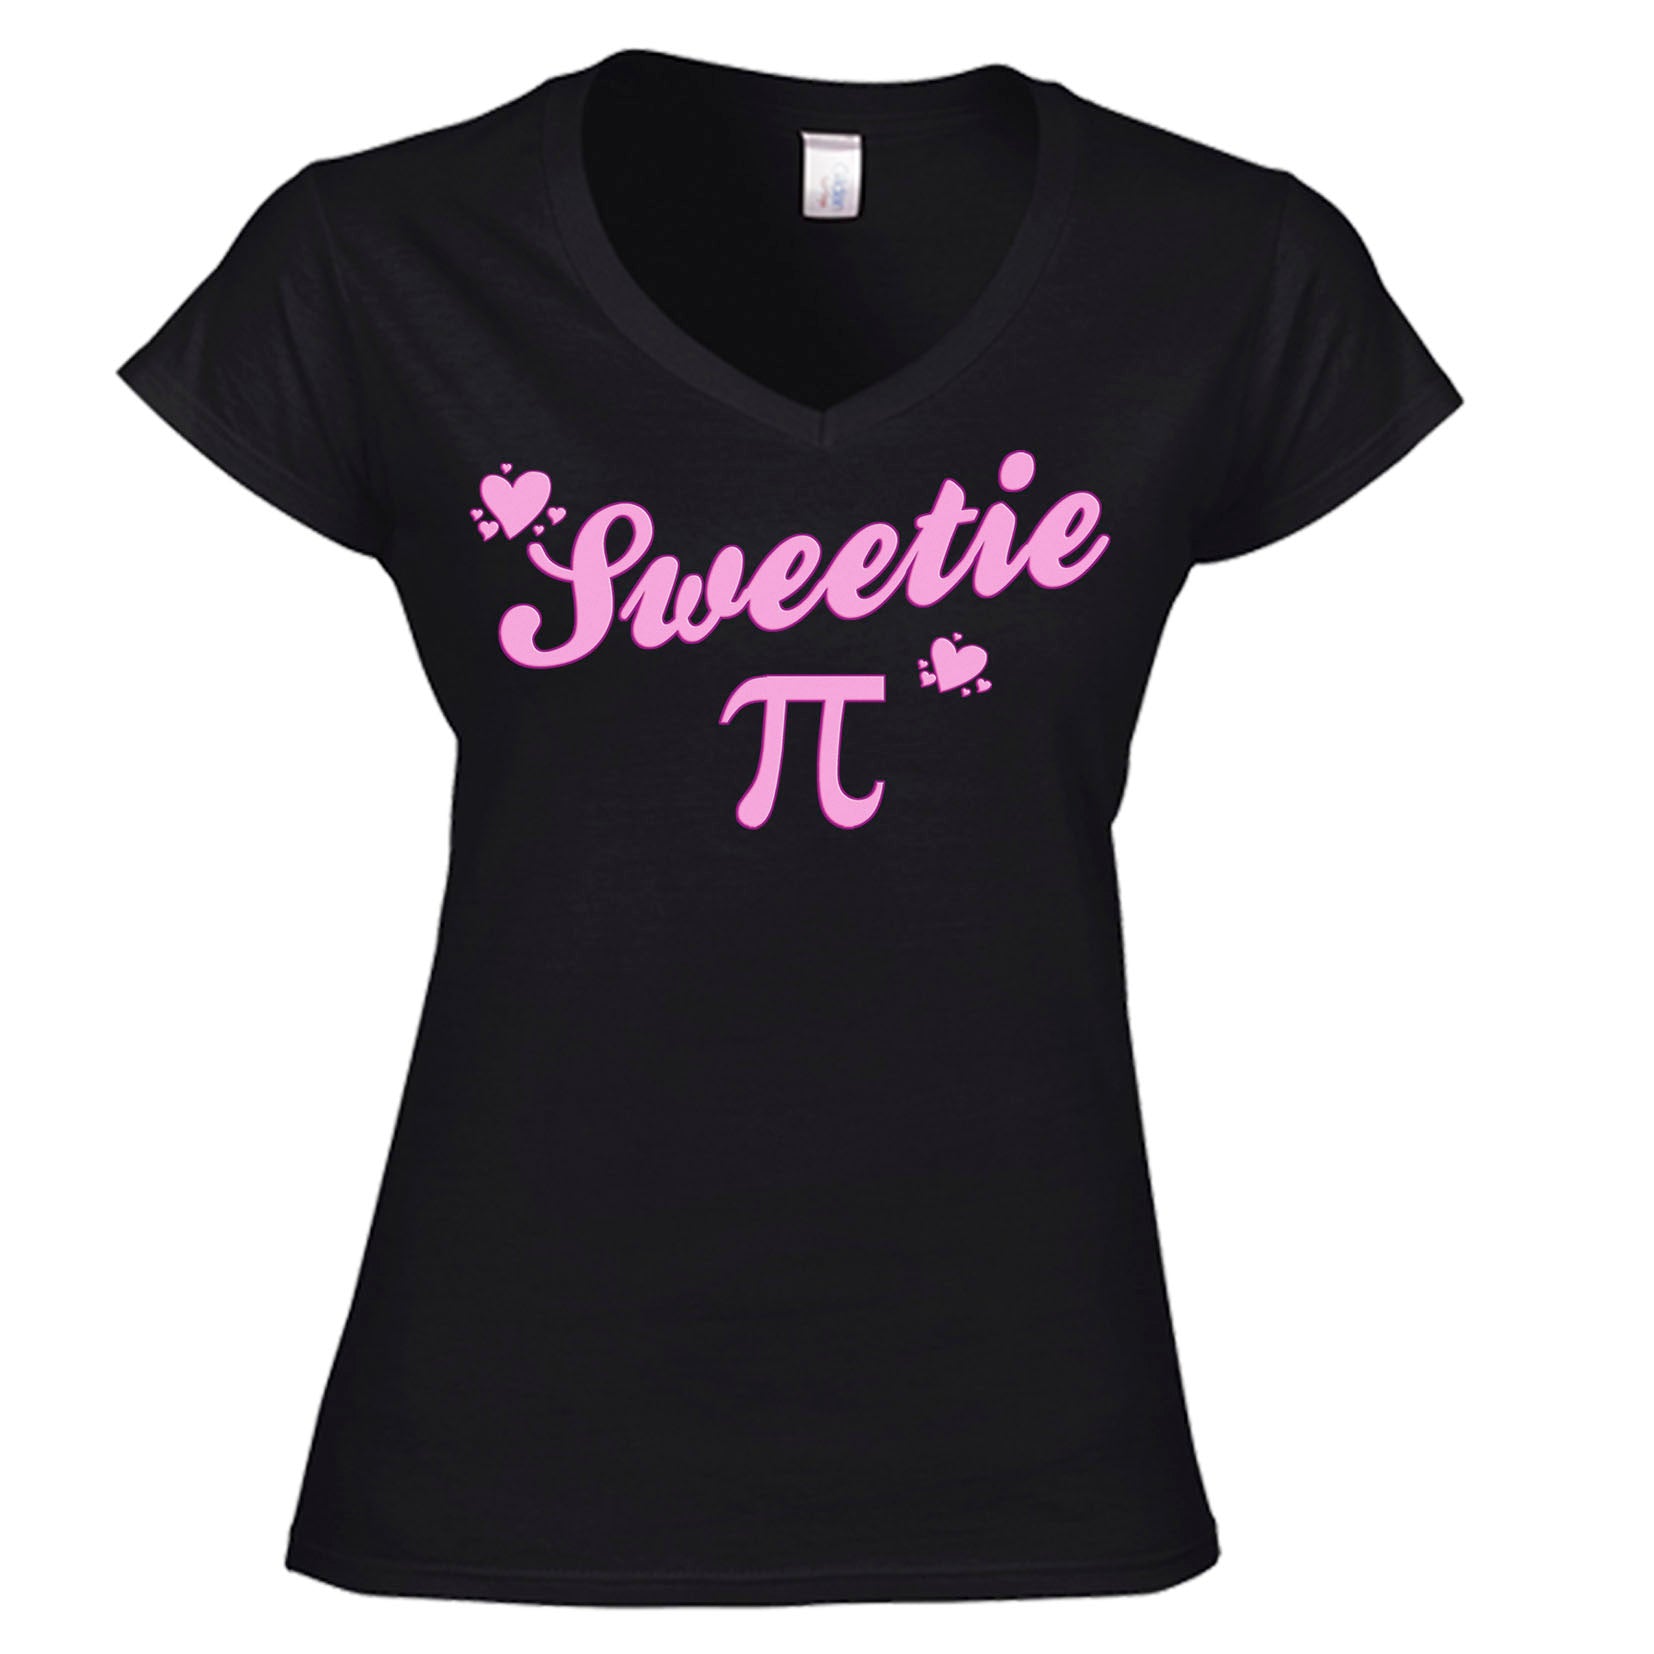 Sweetie Pi T-shirt - black t-shirt with thw word sweetie in pink and the pi symbol underneath